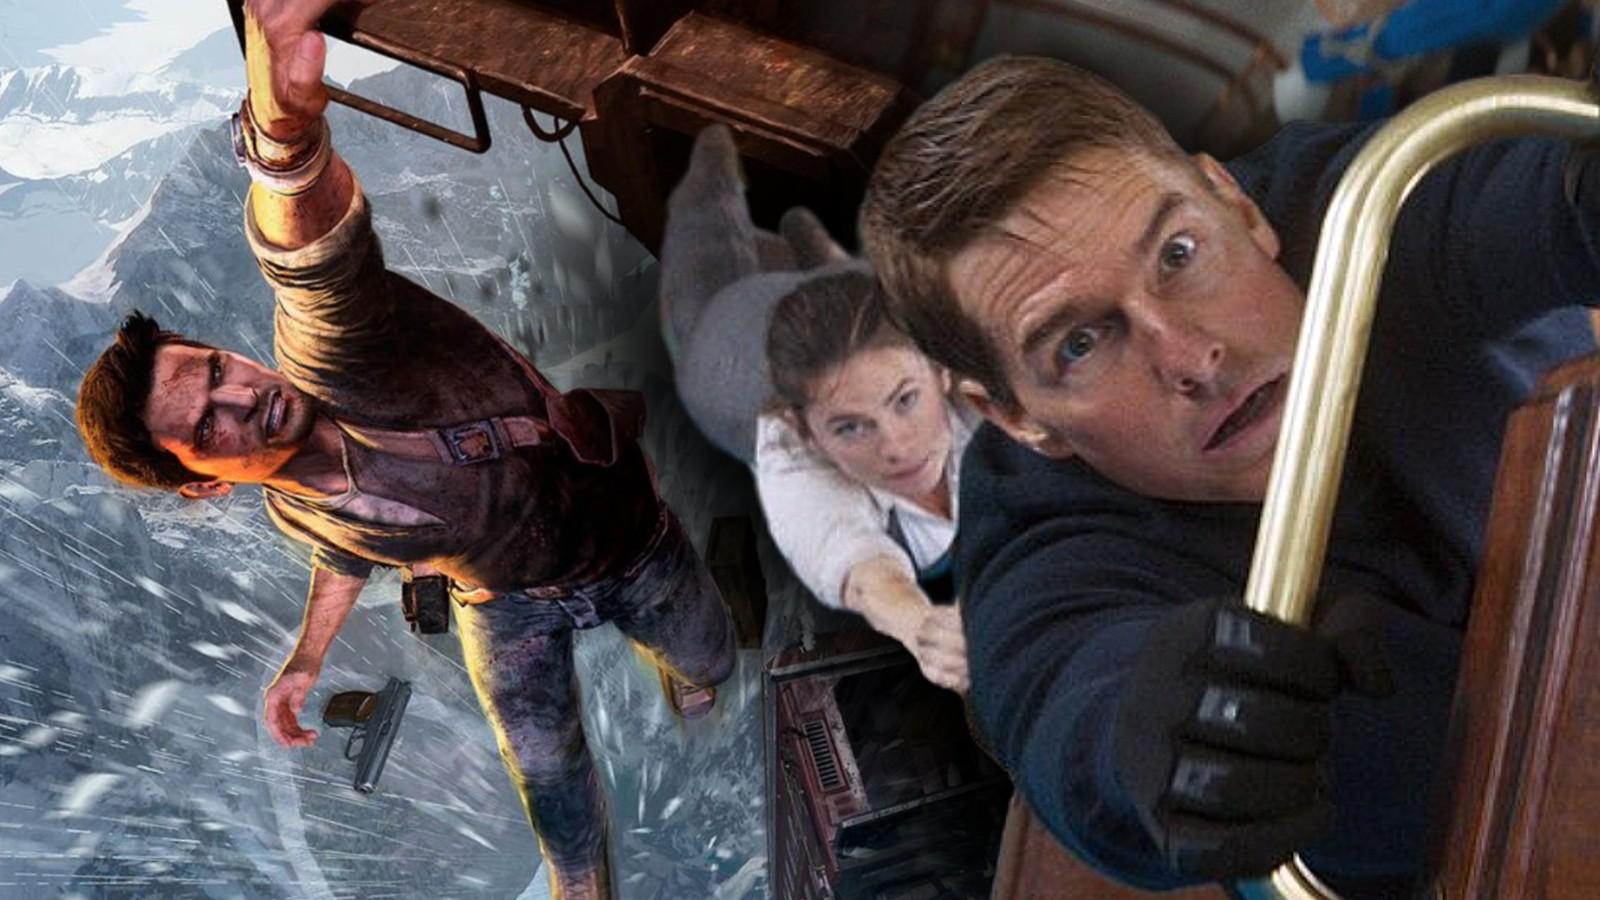 Stills of the train scenes from Uncharted 2 and Mission: Impossible Dead Reckoning Part 1